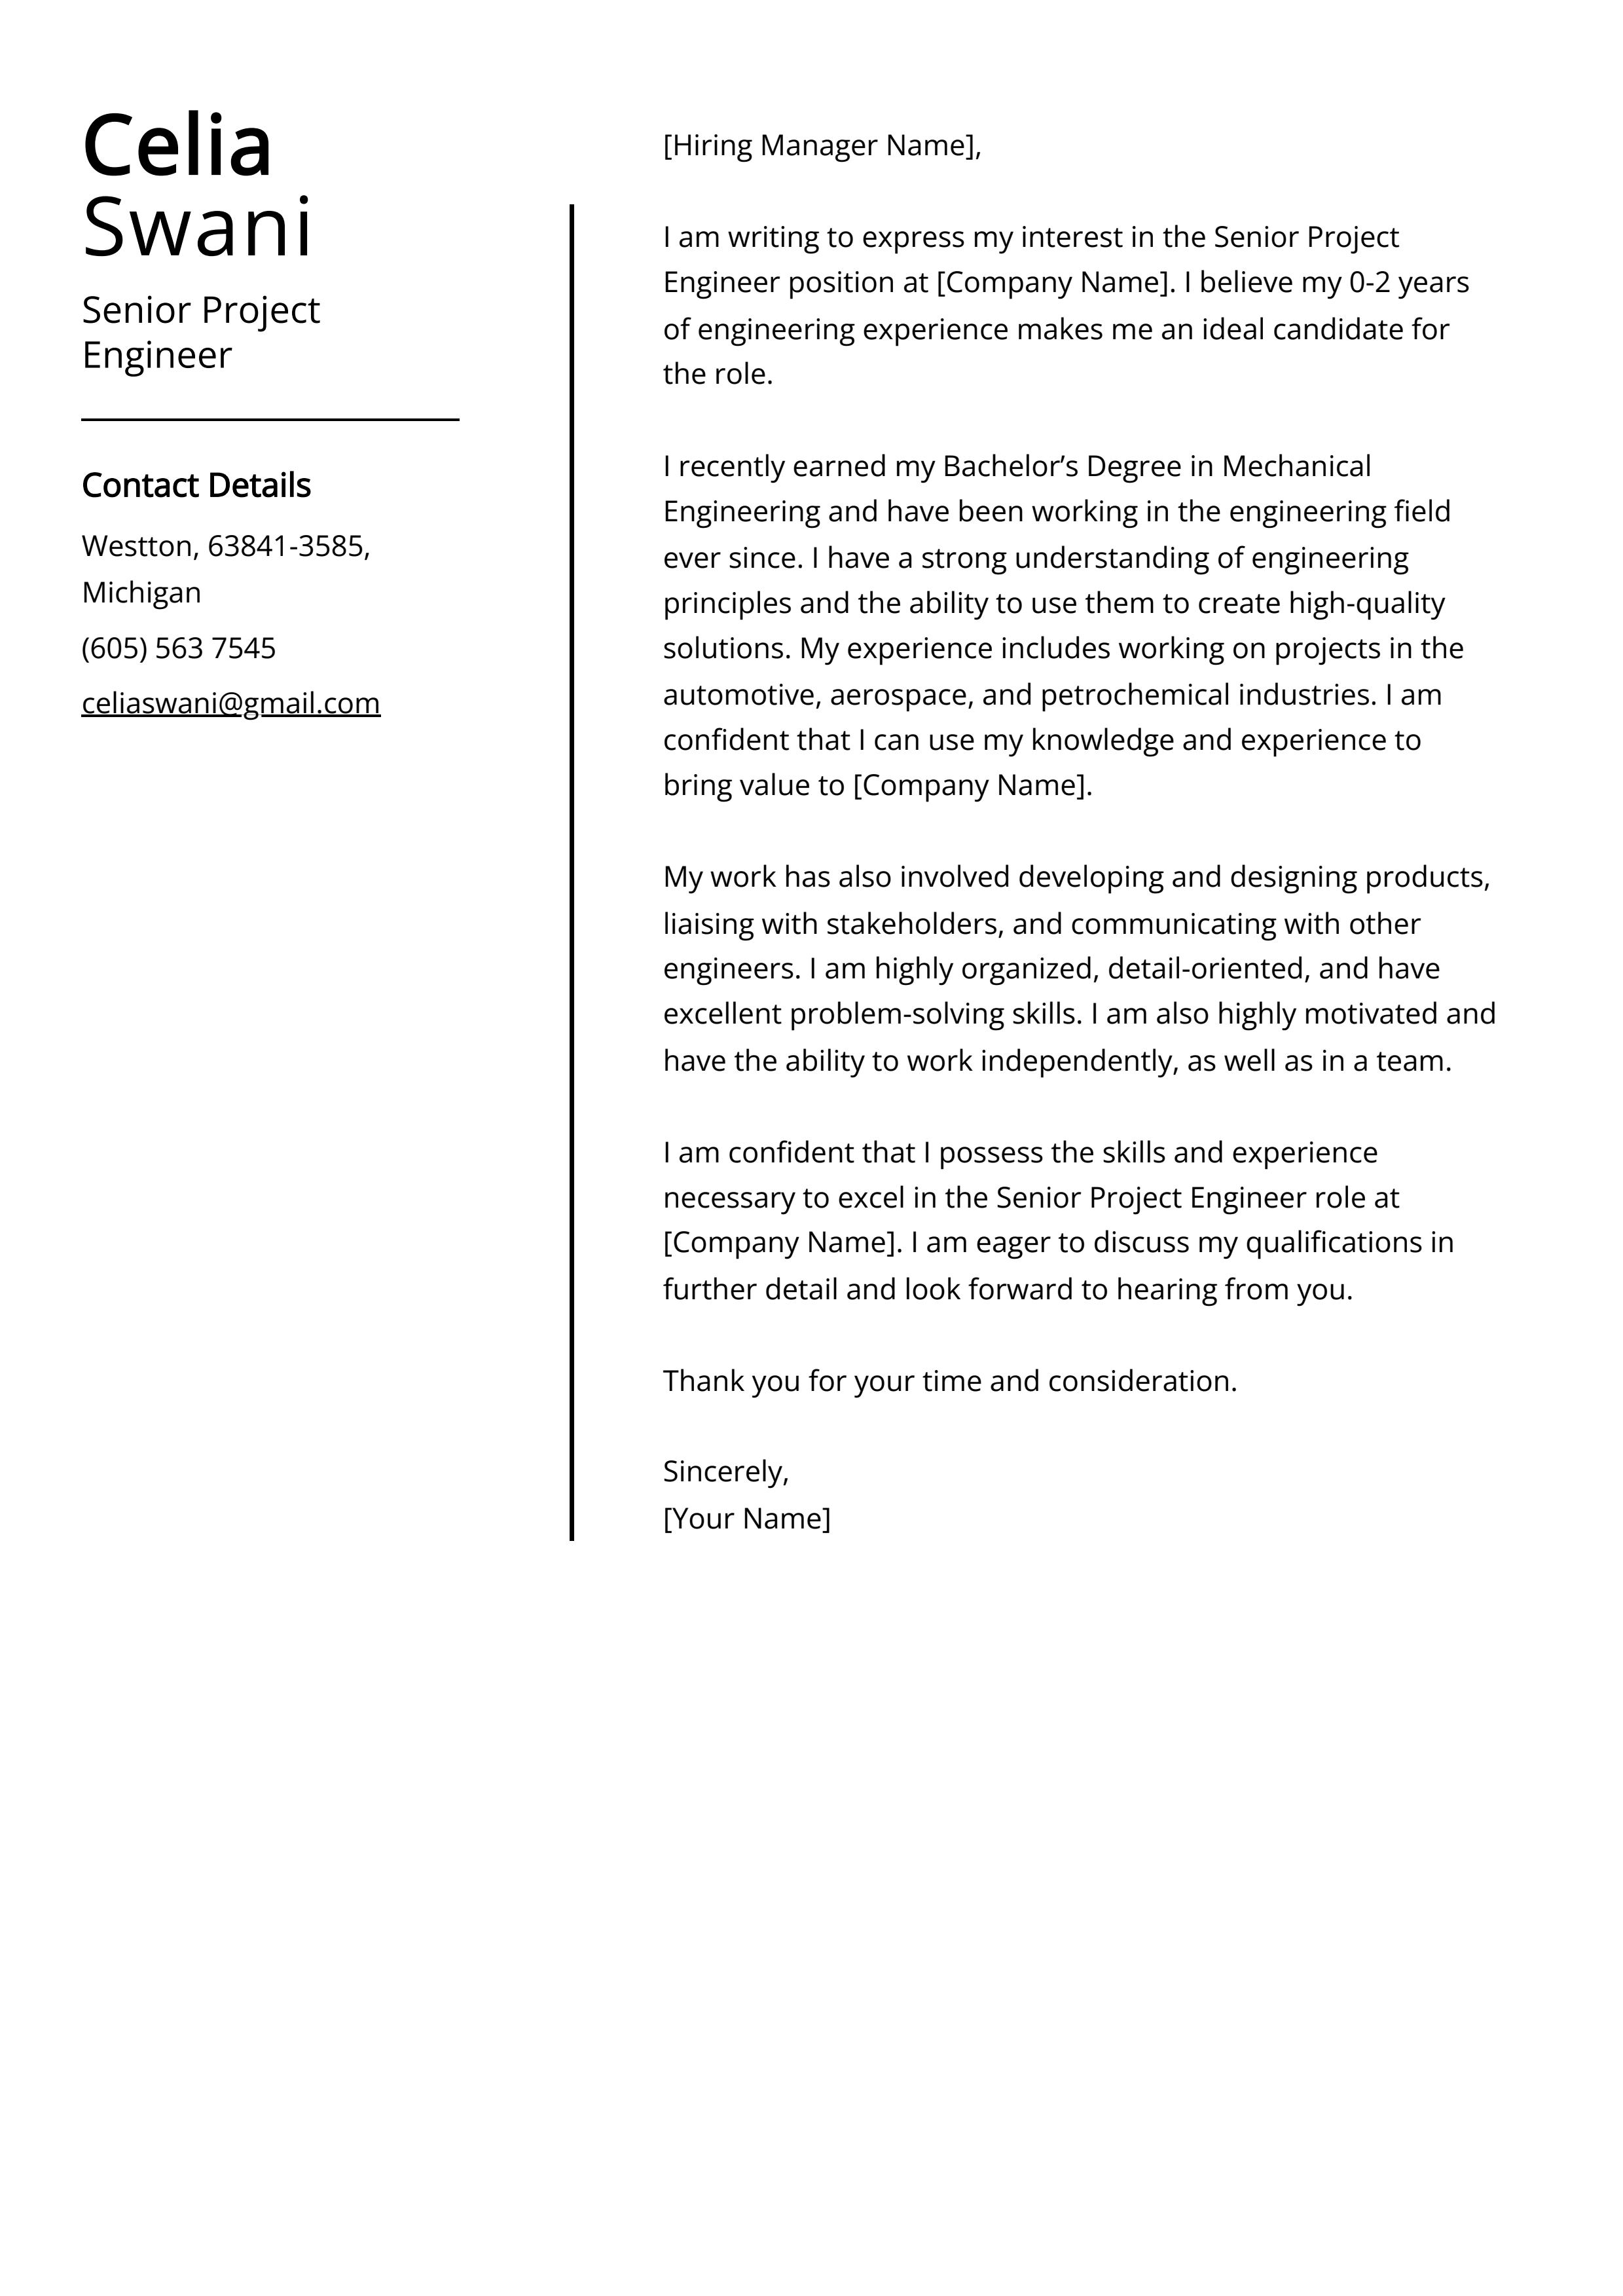 Senior Project Engineer Cover Letter Example